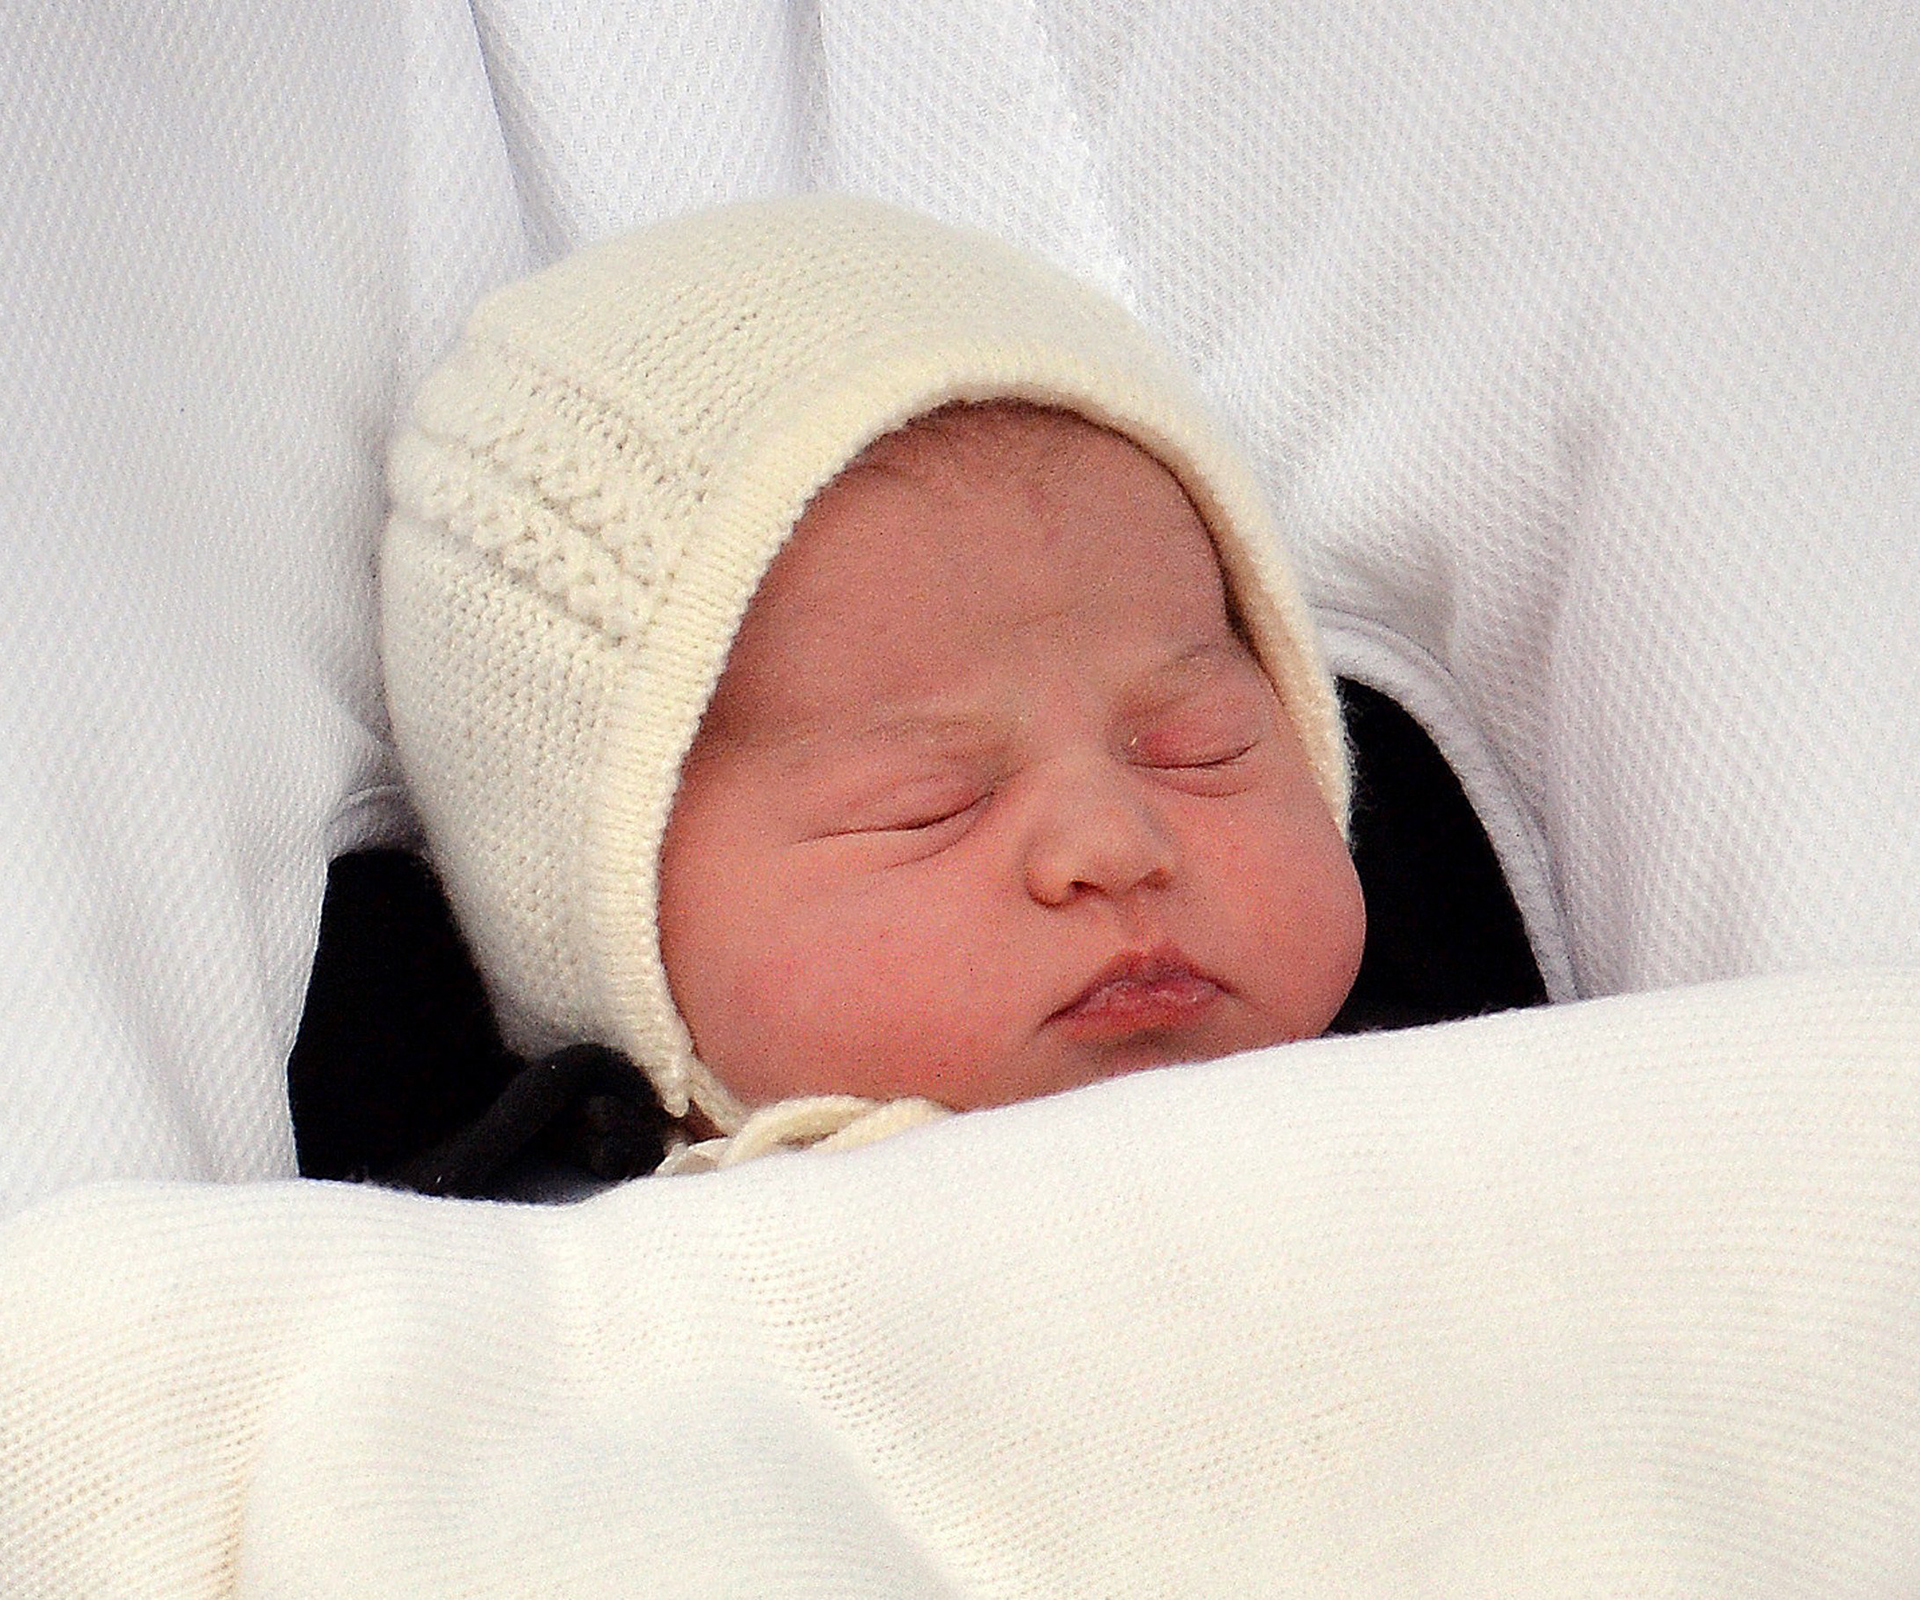 UPDATE: Latest Royal Baby news